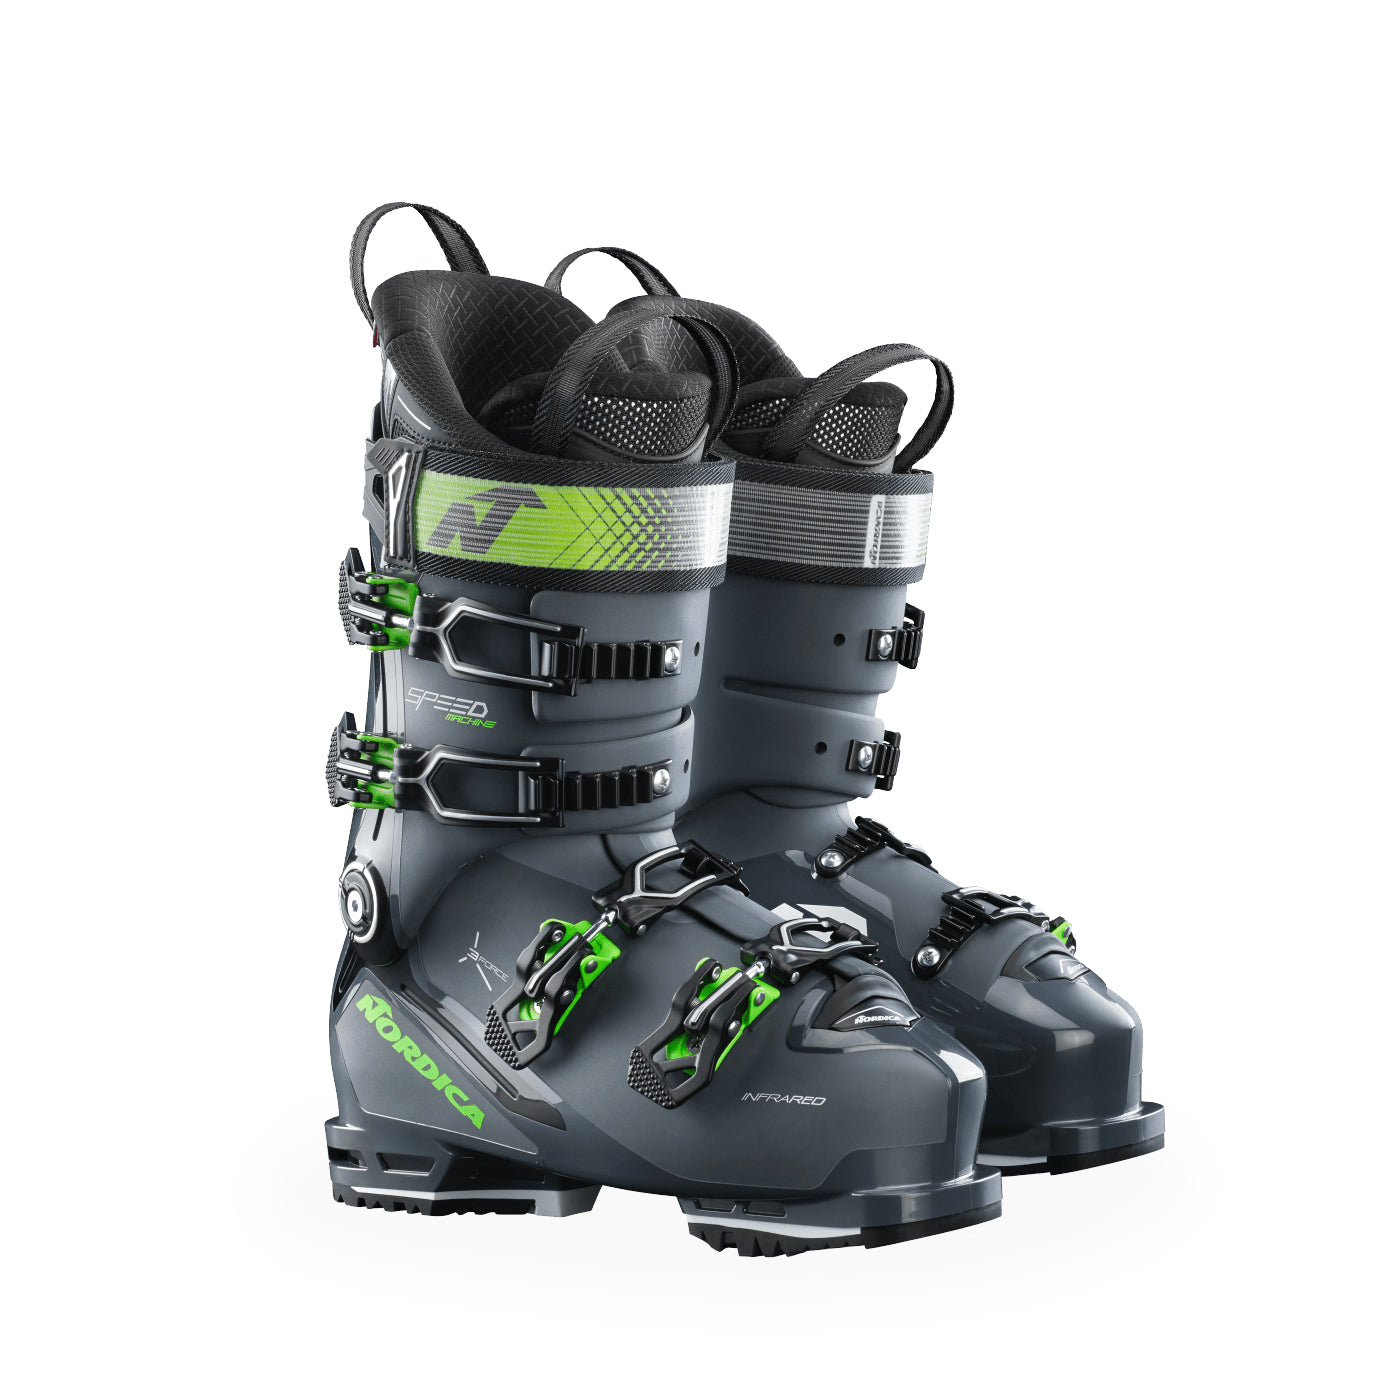 Load image into Gallery viewer, Nordica Speedmachine 3 120 (GW) Ski Boots
